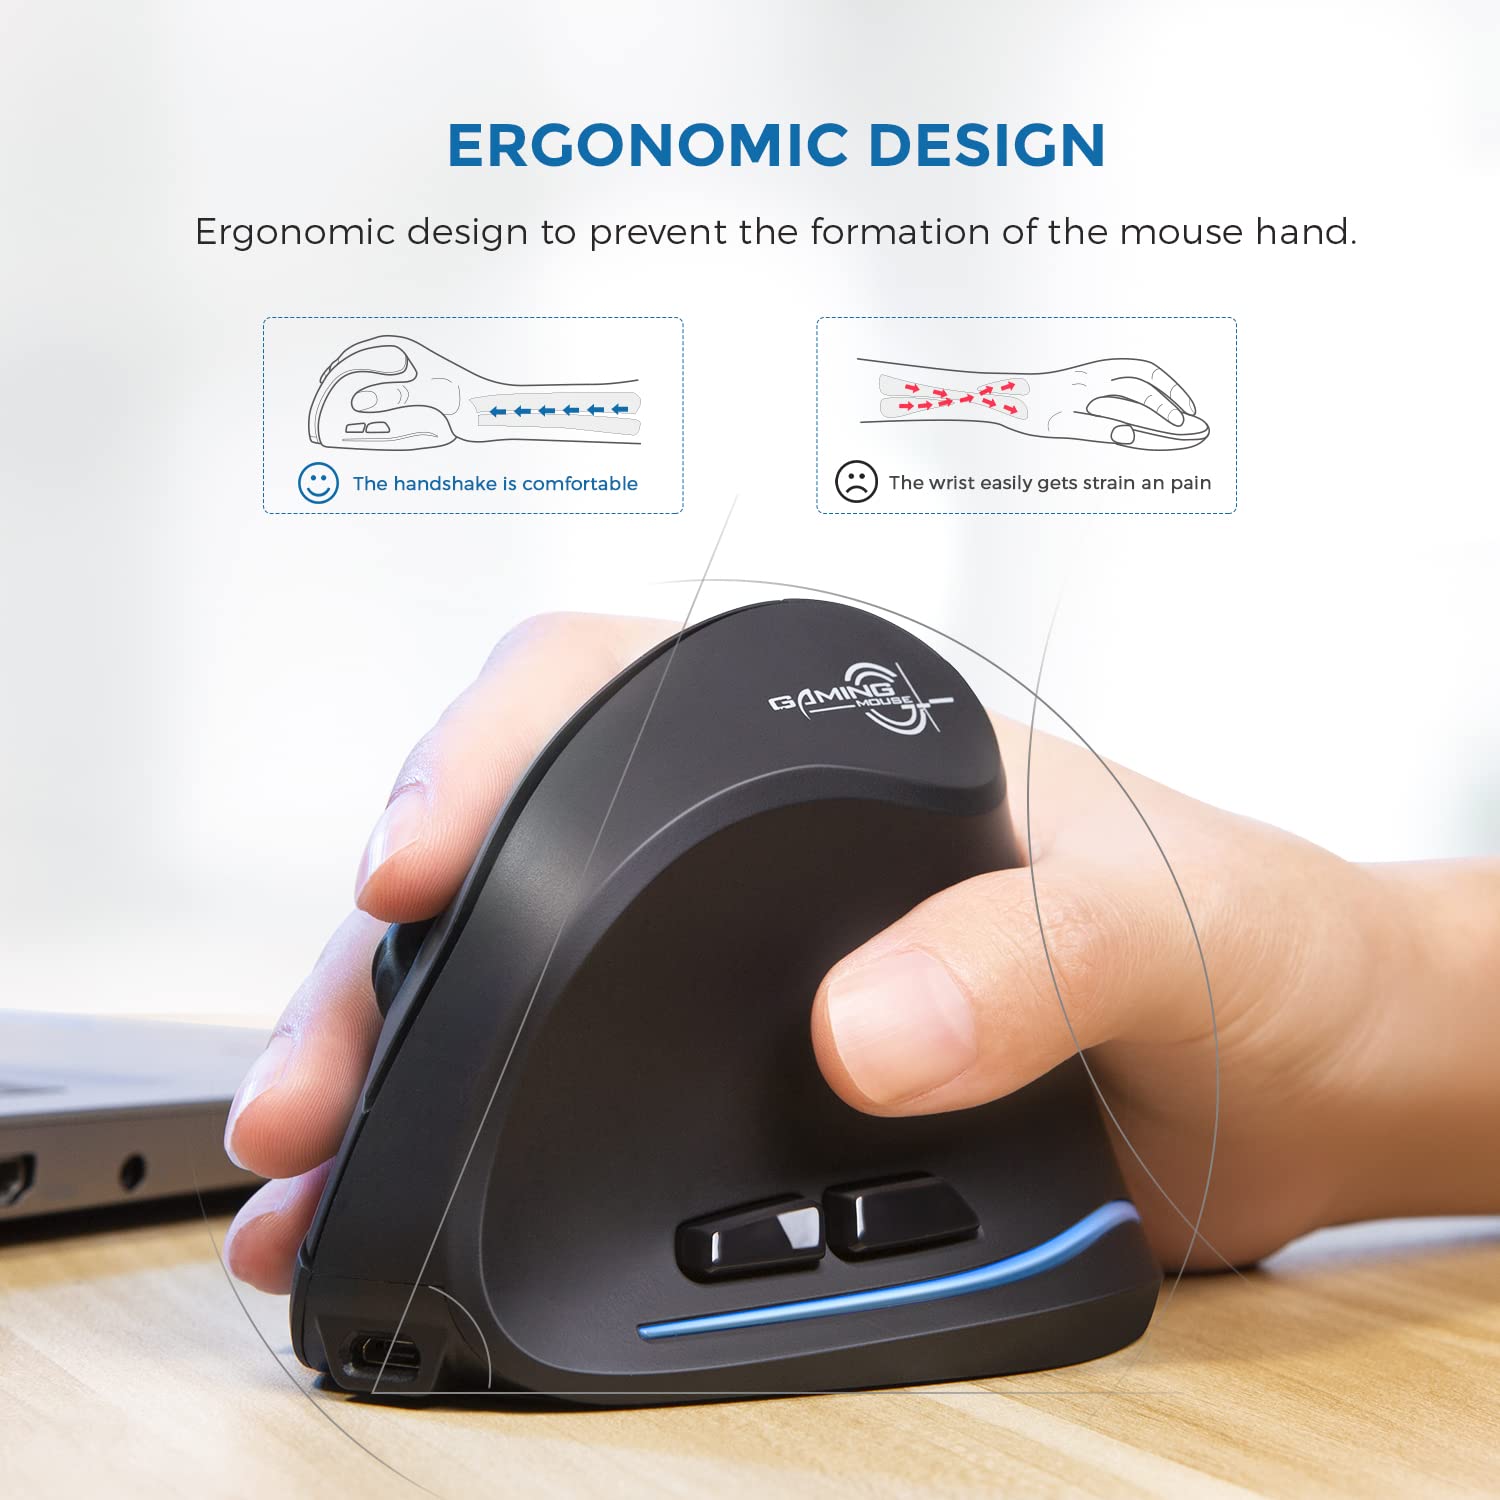 ECHTPower Ergonomic Wireless Mouse, Vertical Mouse with Adjustable DPI 2400/1600/1000, Rechargeable Mice with LED Light, Ergo Mouse for Laptop/PC/Windows/macOS